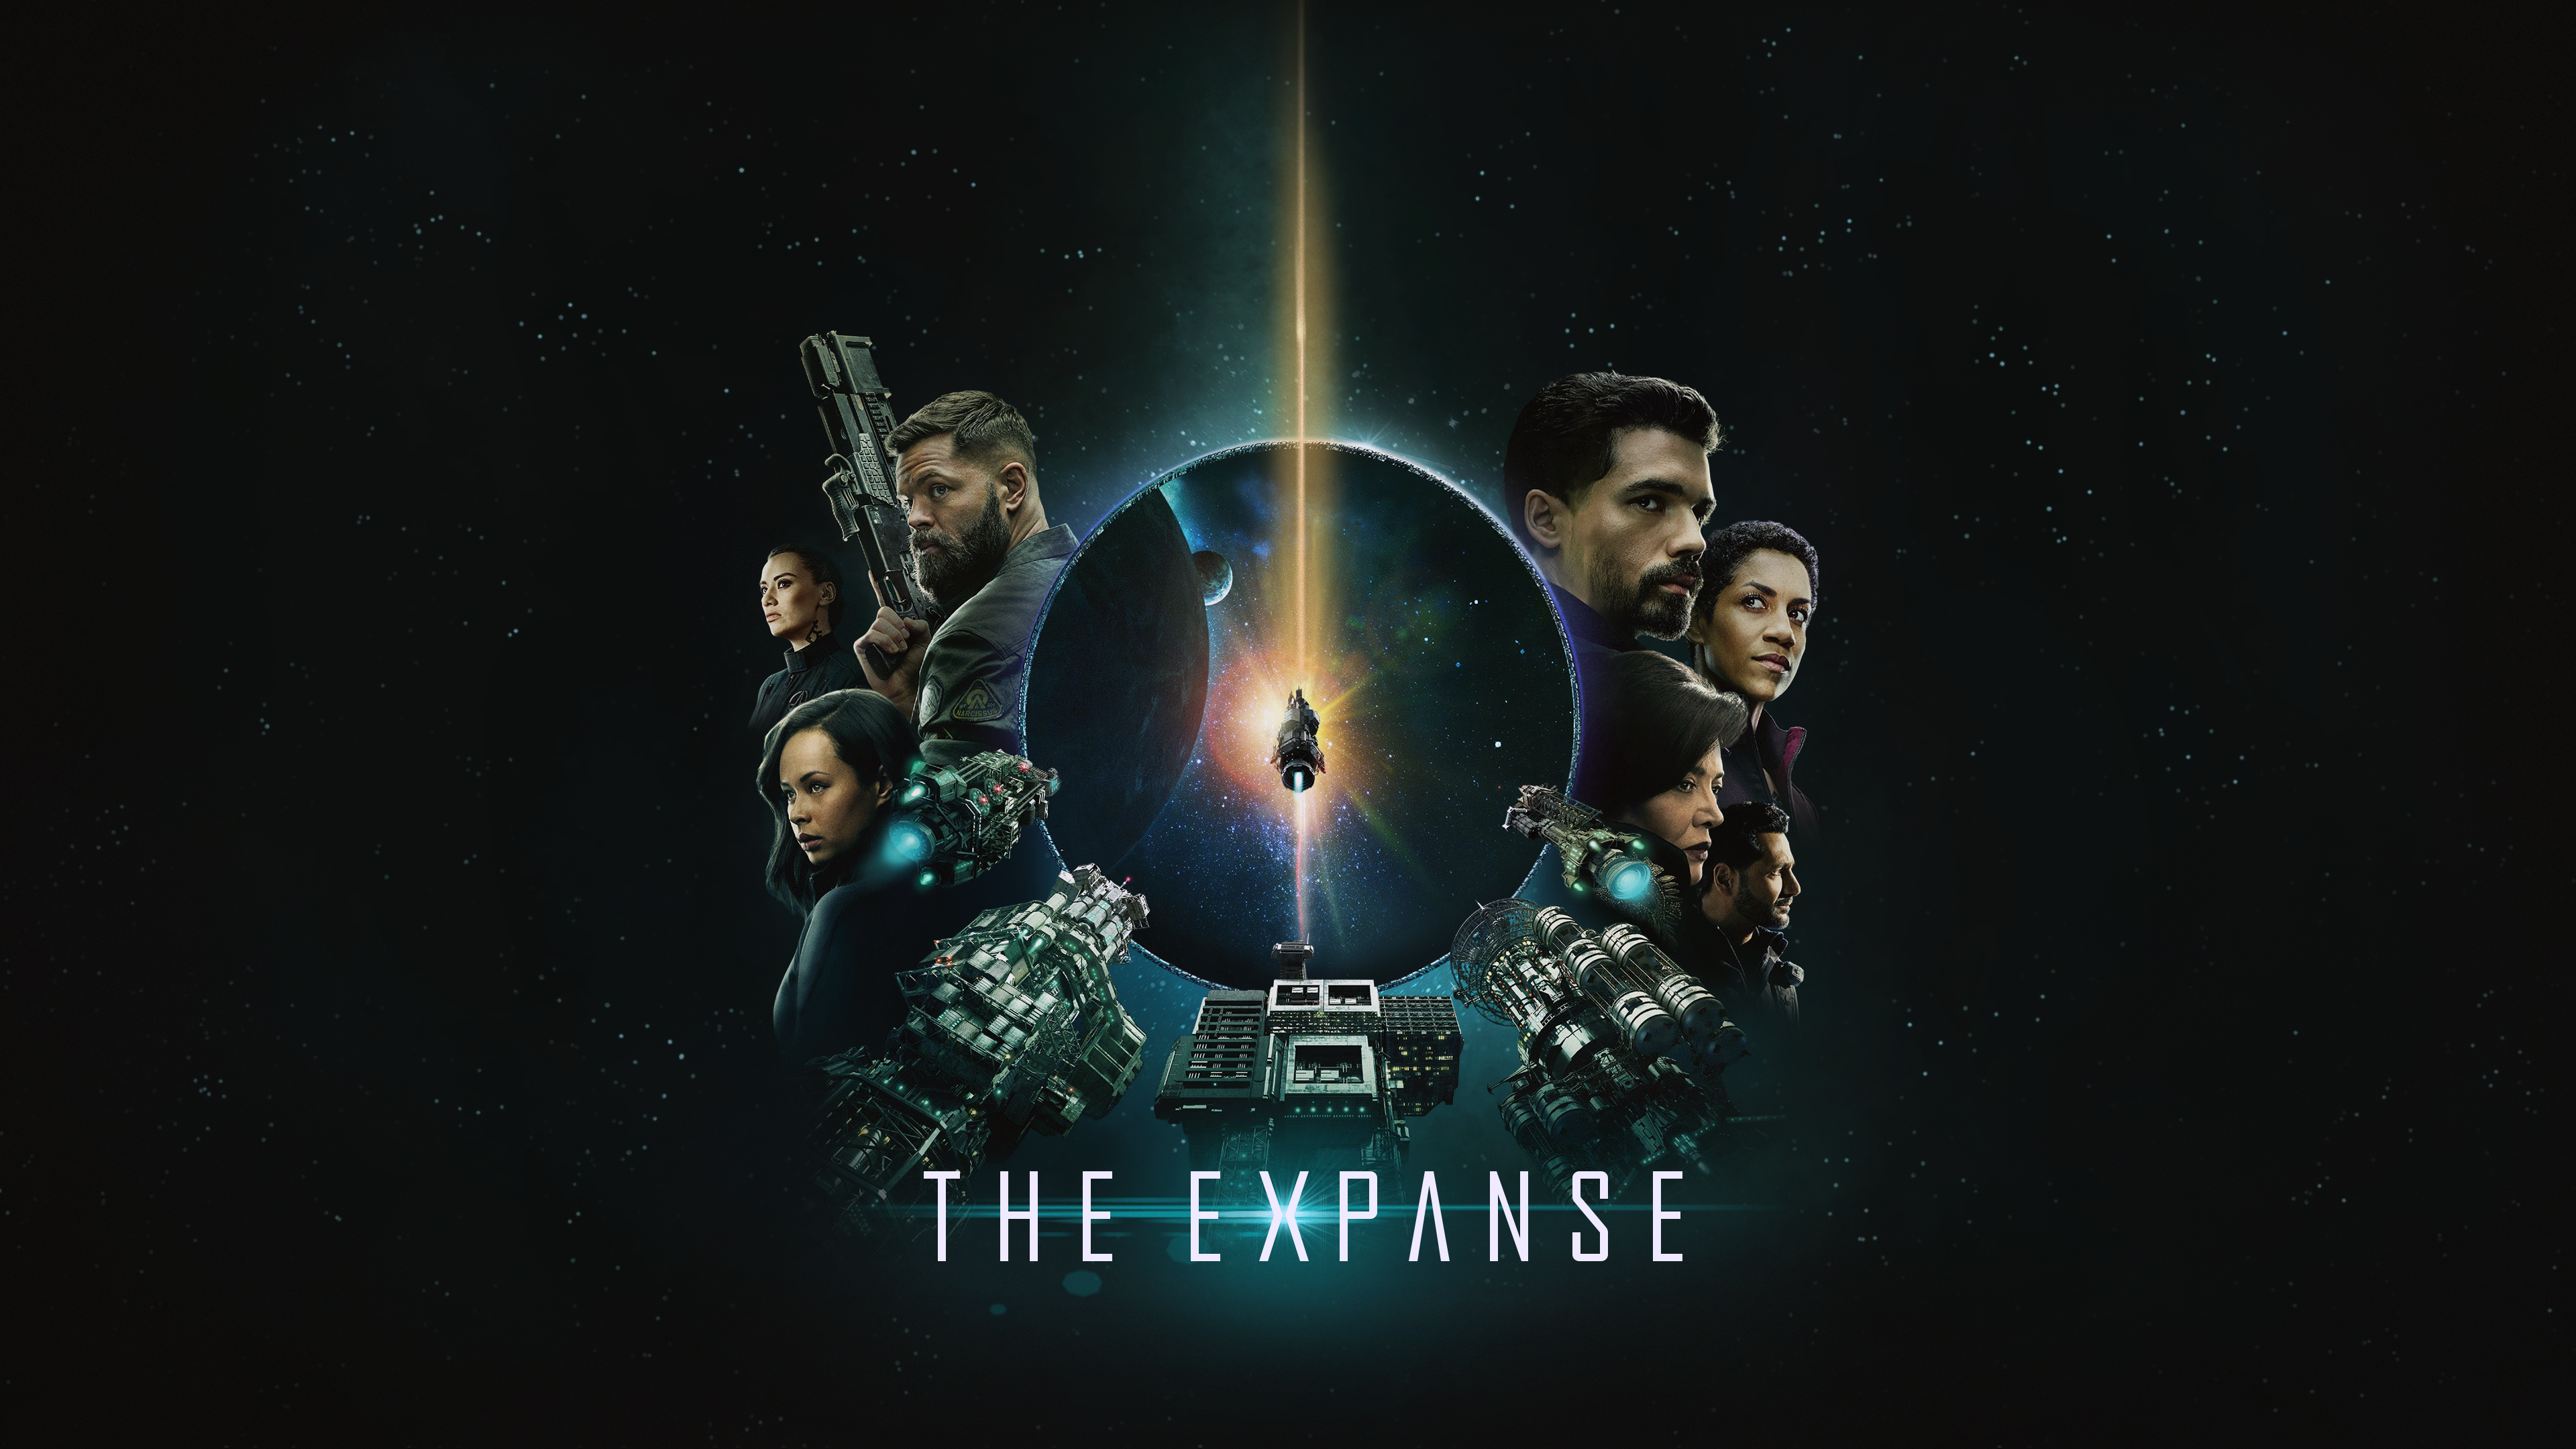 General 3840x2160 The Expanse space science fiction TV series digital art